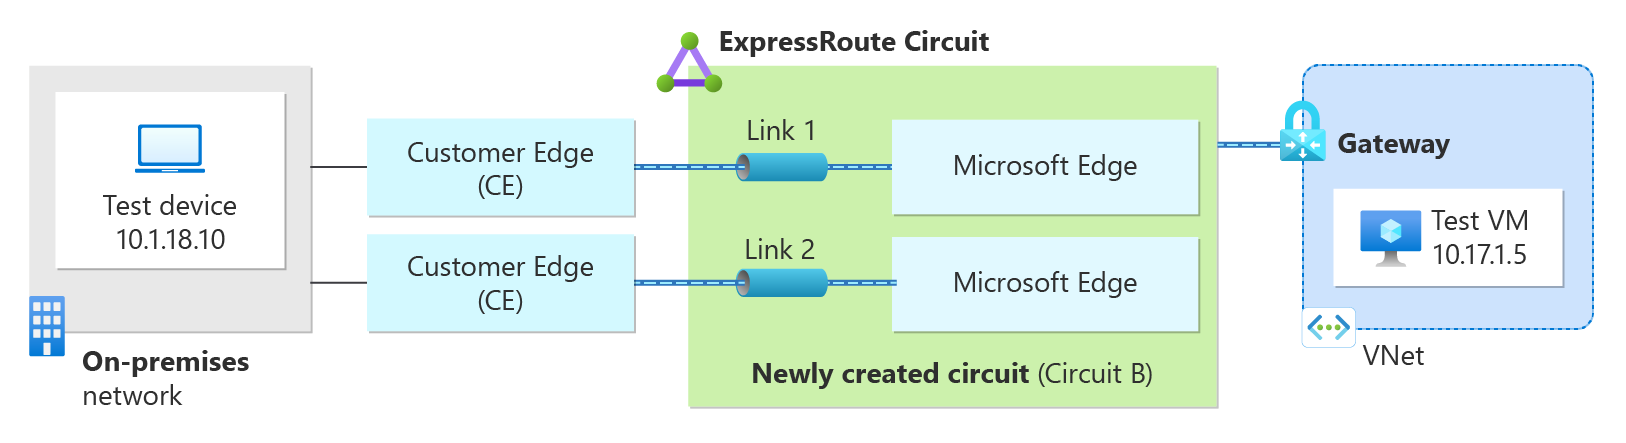 Diagram showing a VM in Azure communicating with a test device on-premises through the ExpressRoute connection.